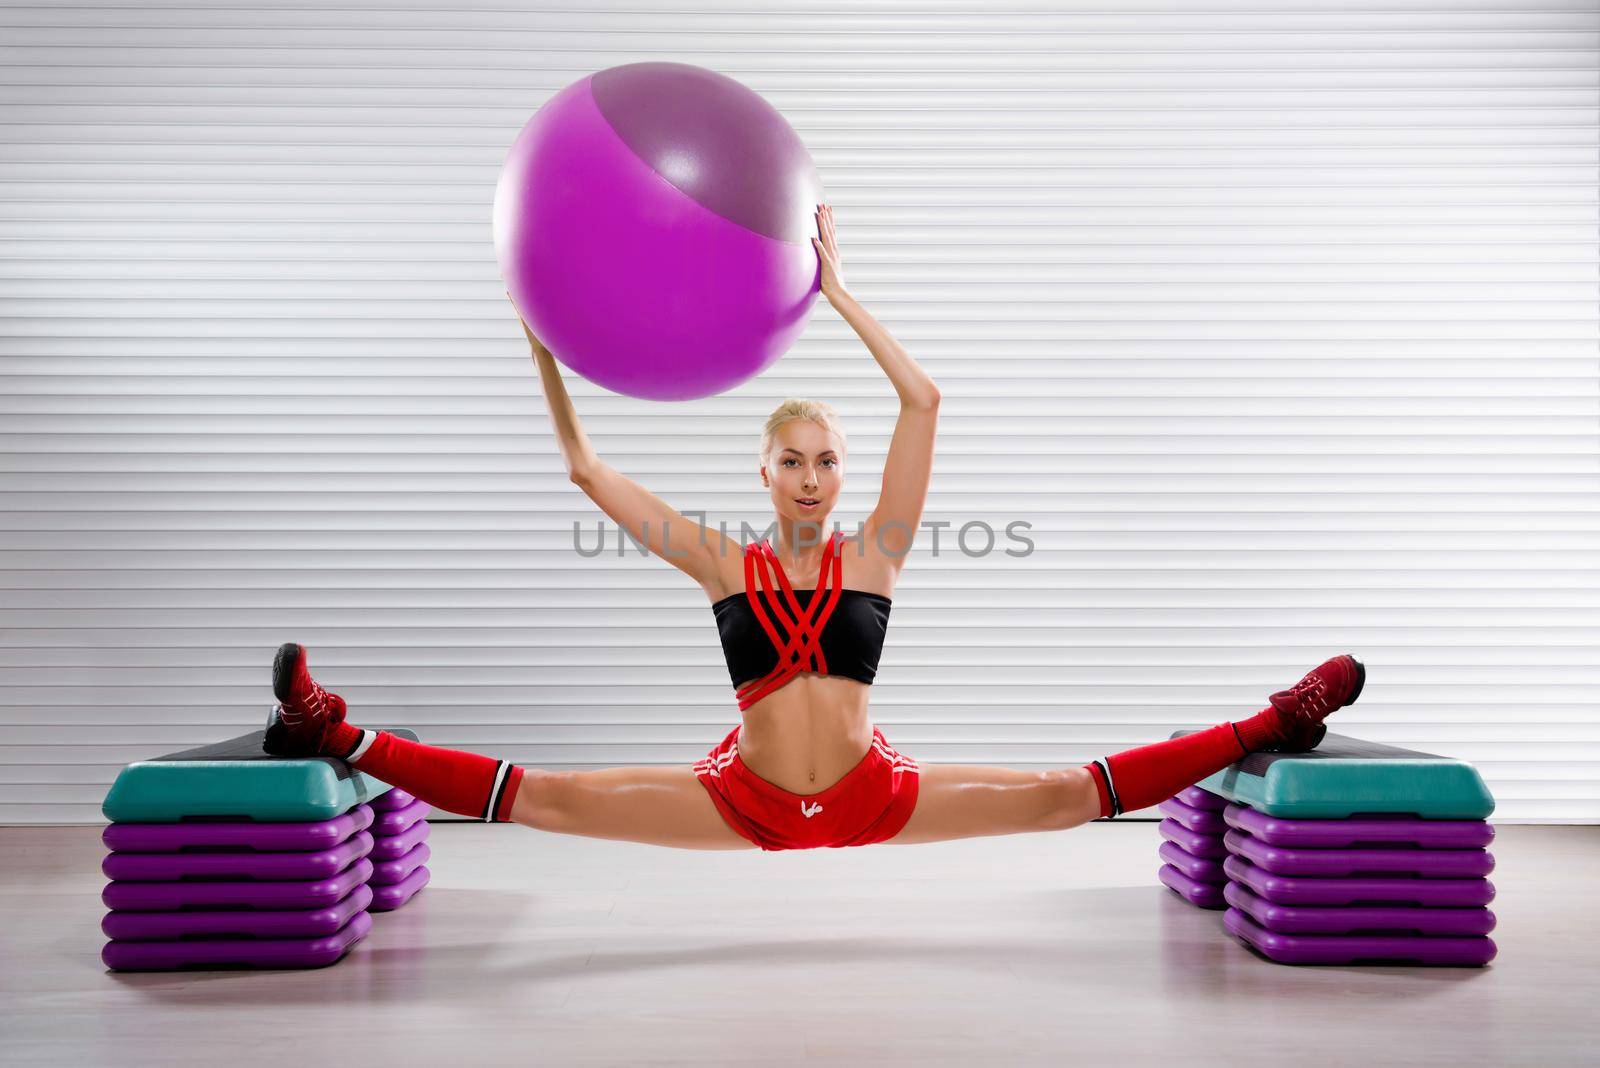 Stunning flexible female gymnast holding a fit ball over her head while practicing splits at the fitness studio flexibility stretching exercise workout trainer body strength motivation sports concept.